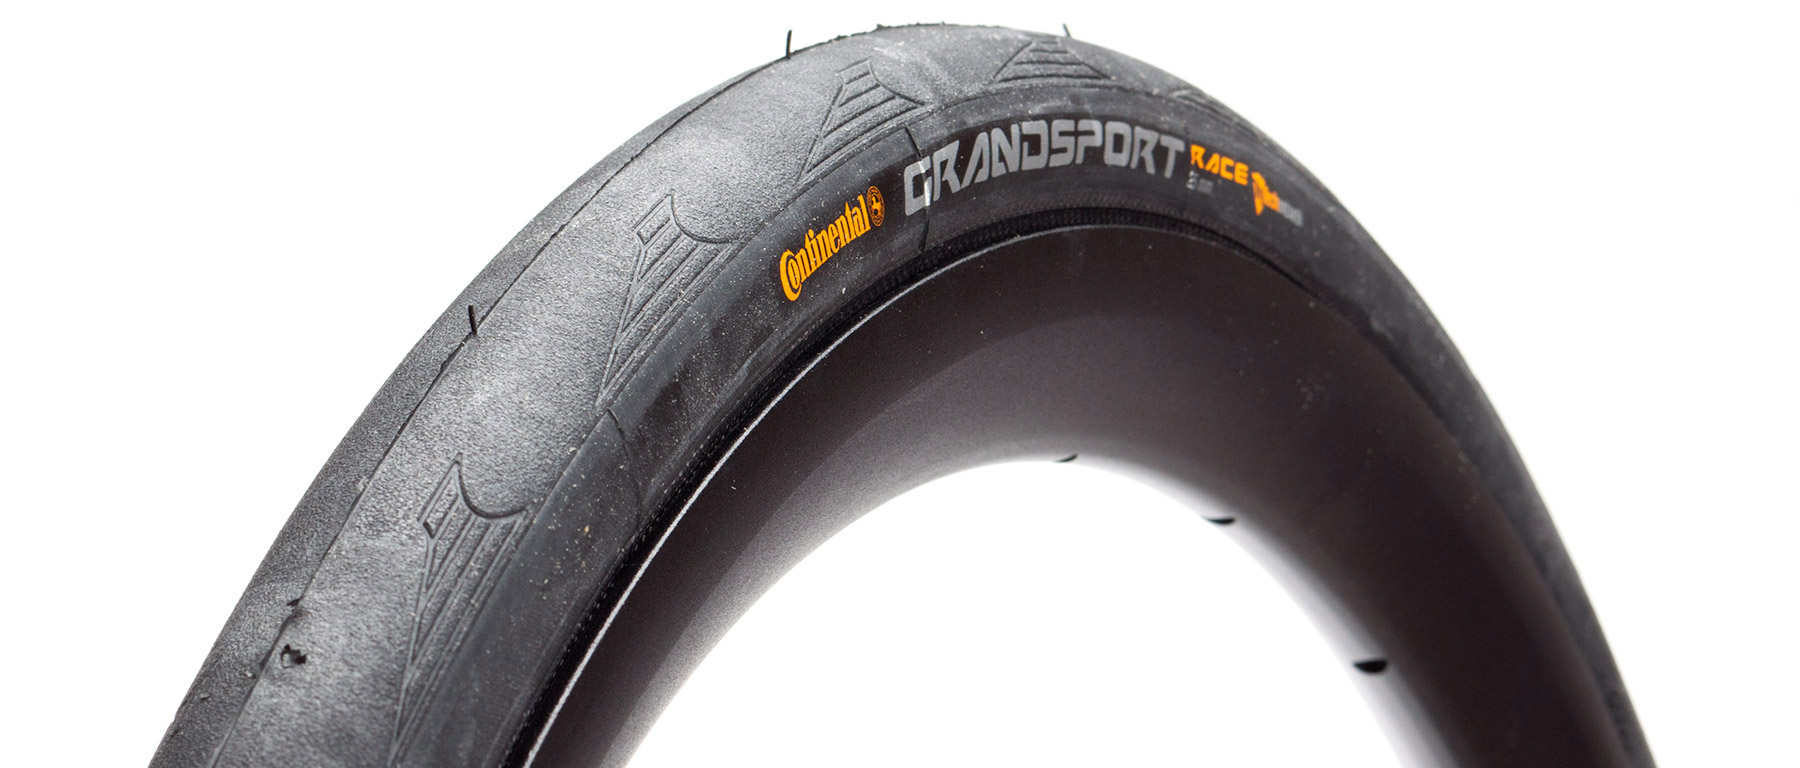 Continental Grand Sport Race Road Tire 2-Pack